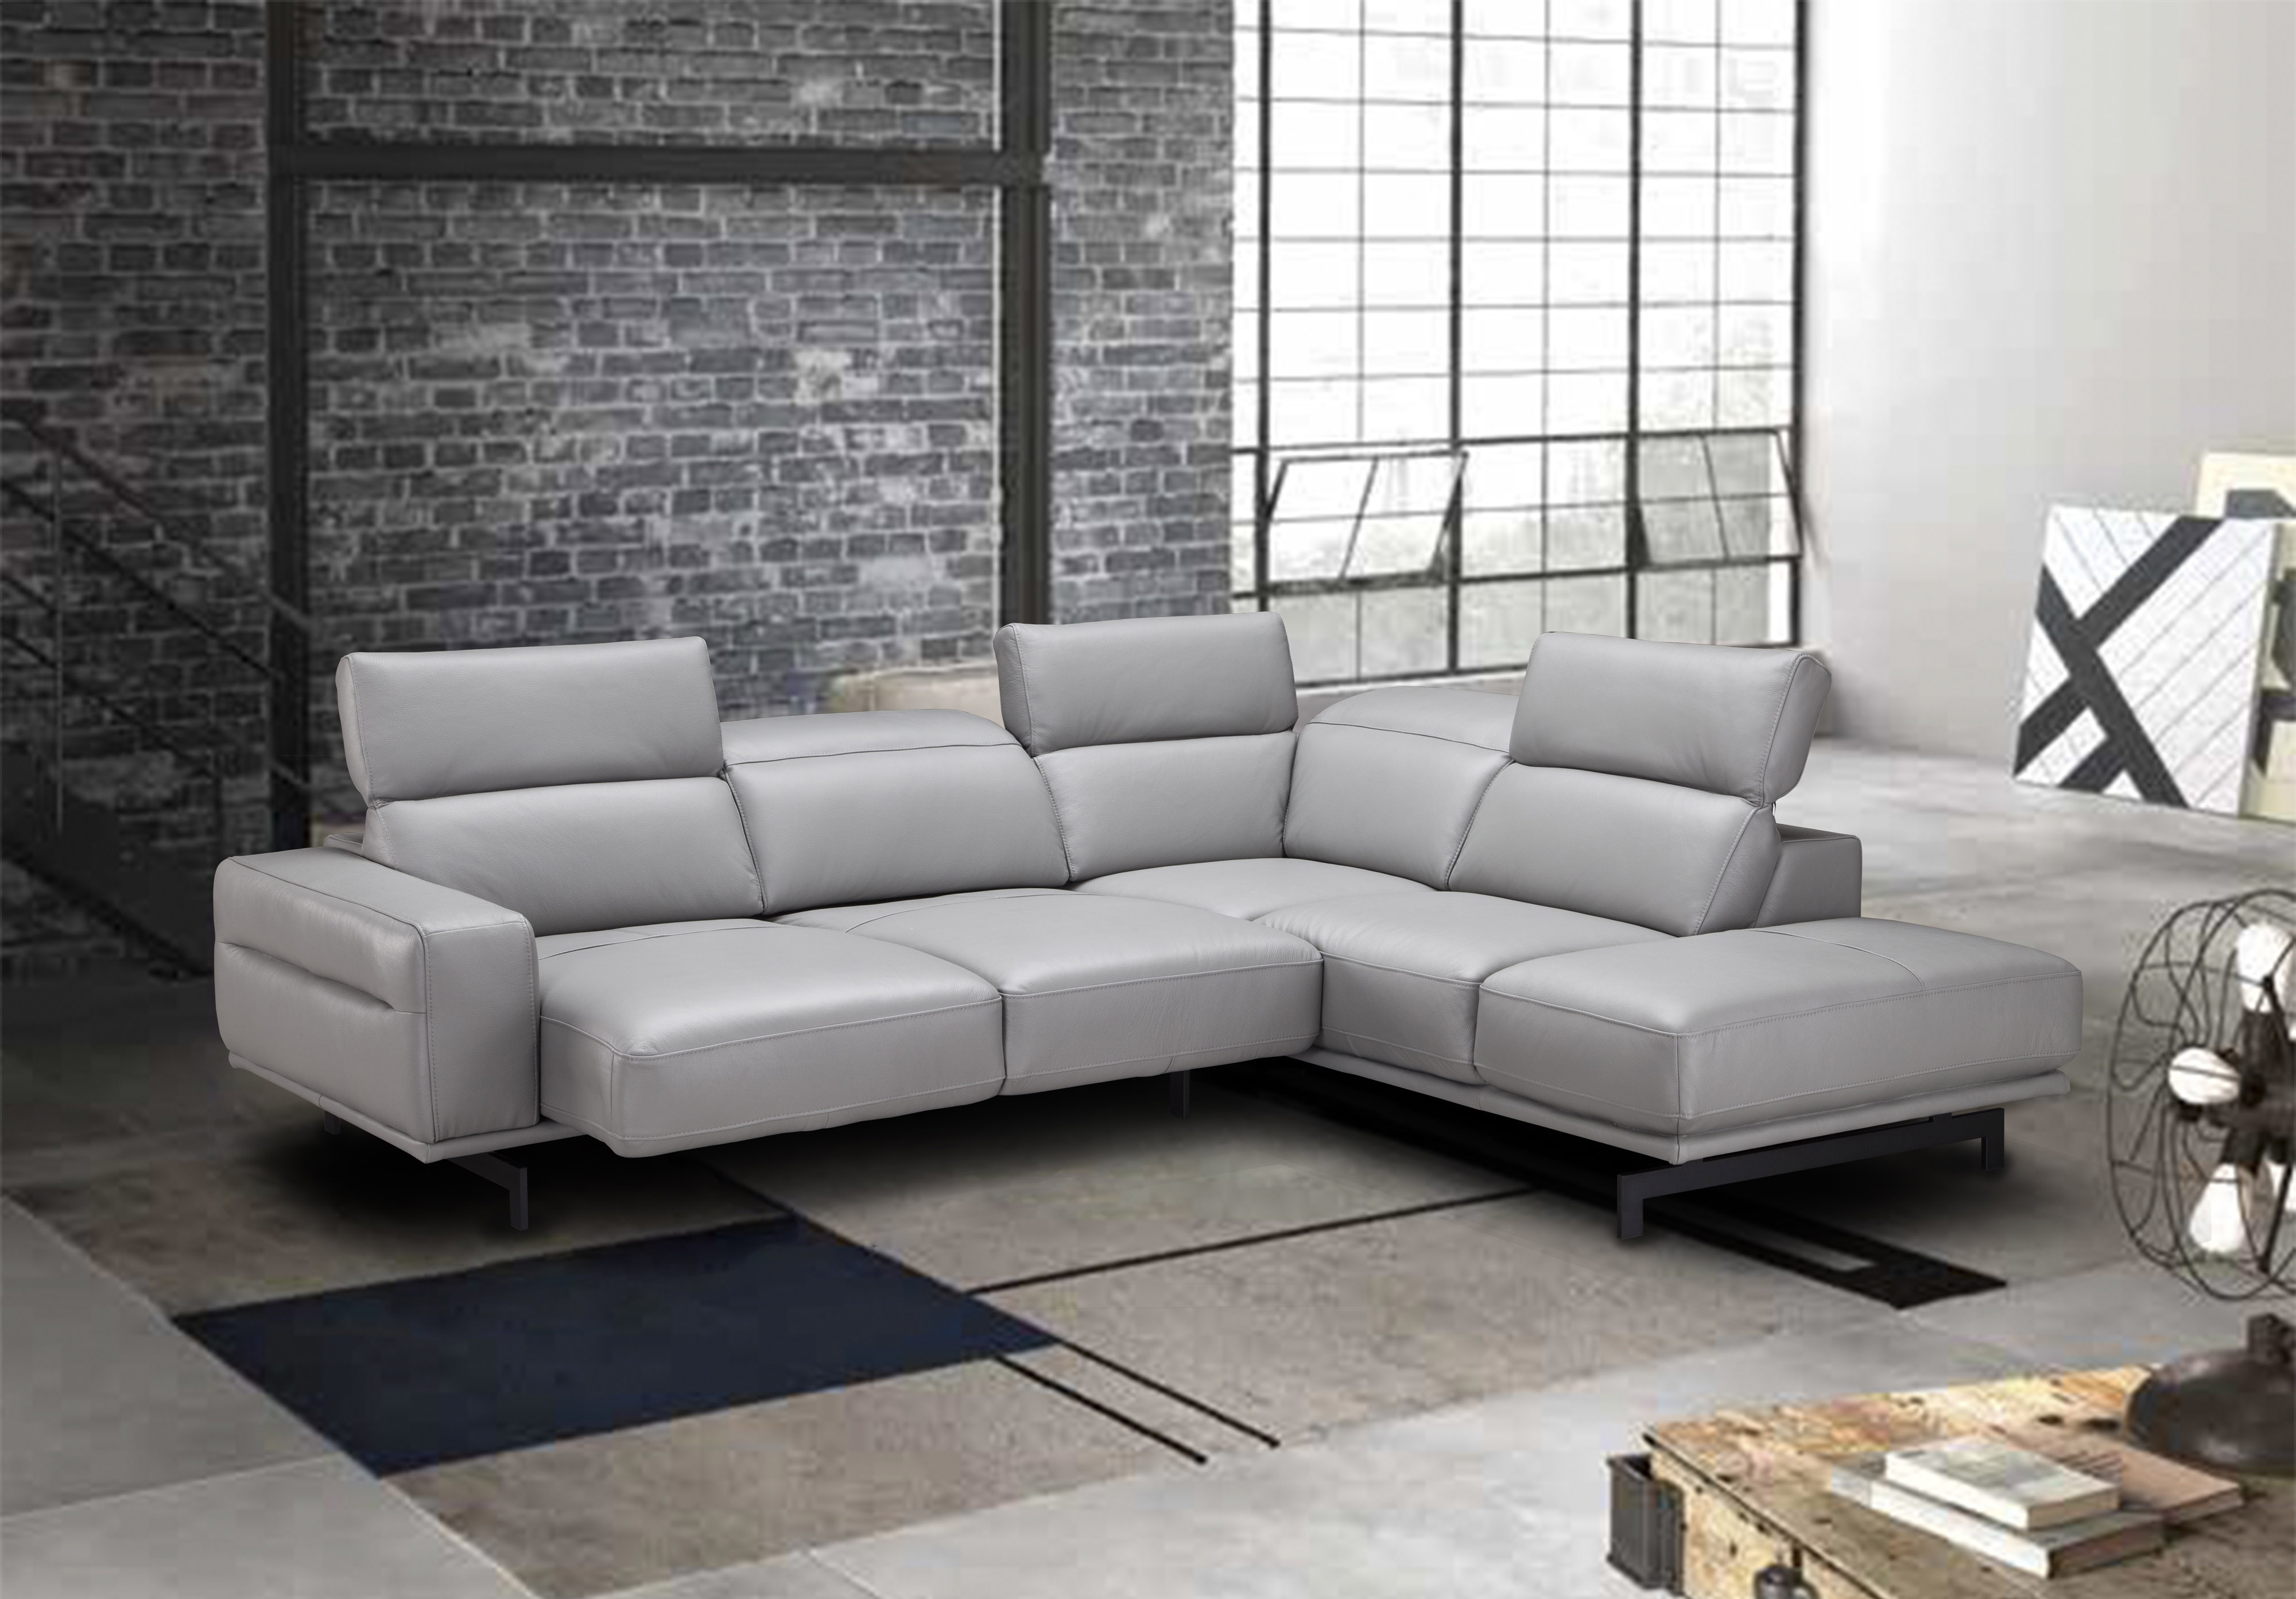 Adjustable Advanced Italian Top Grain, Italian Leather Sectional With Chaise